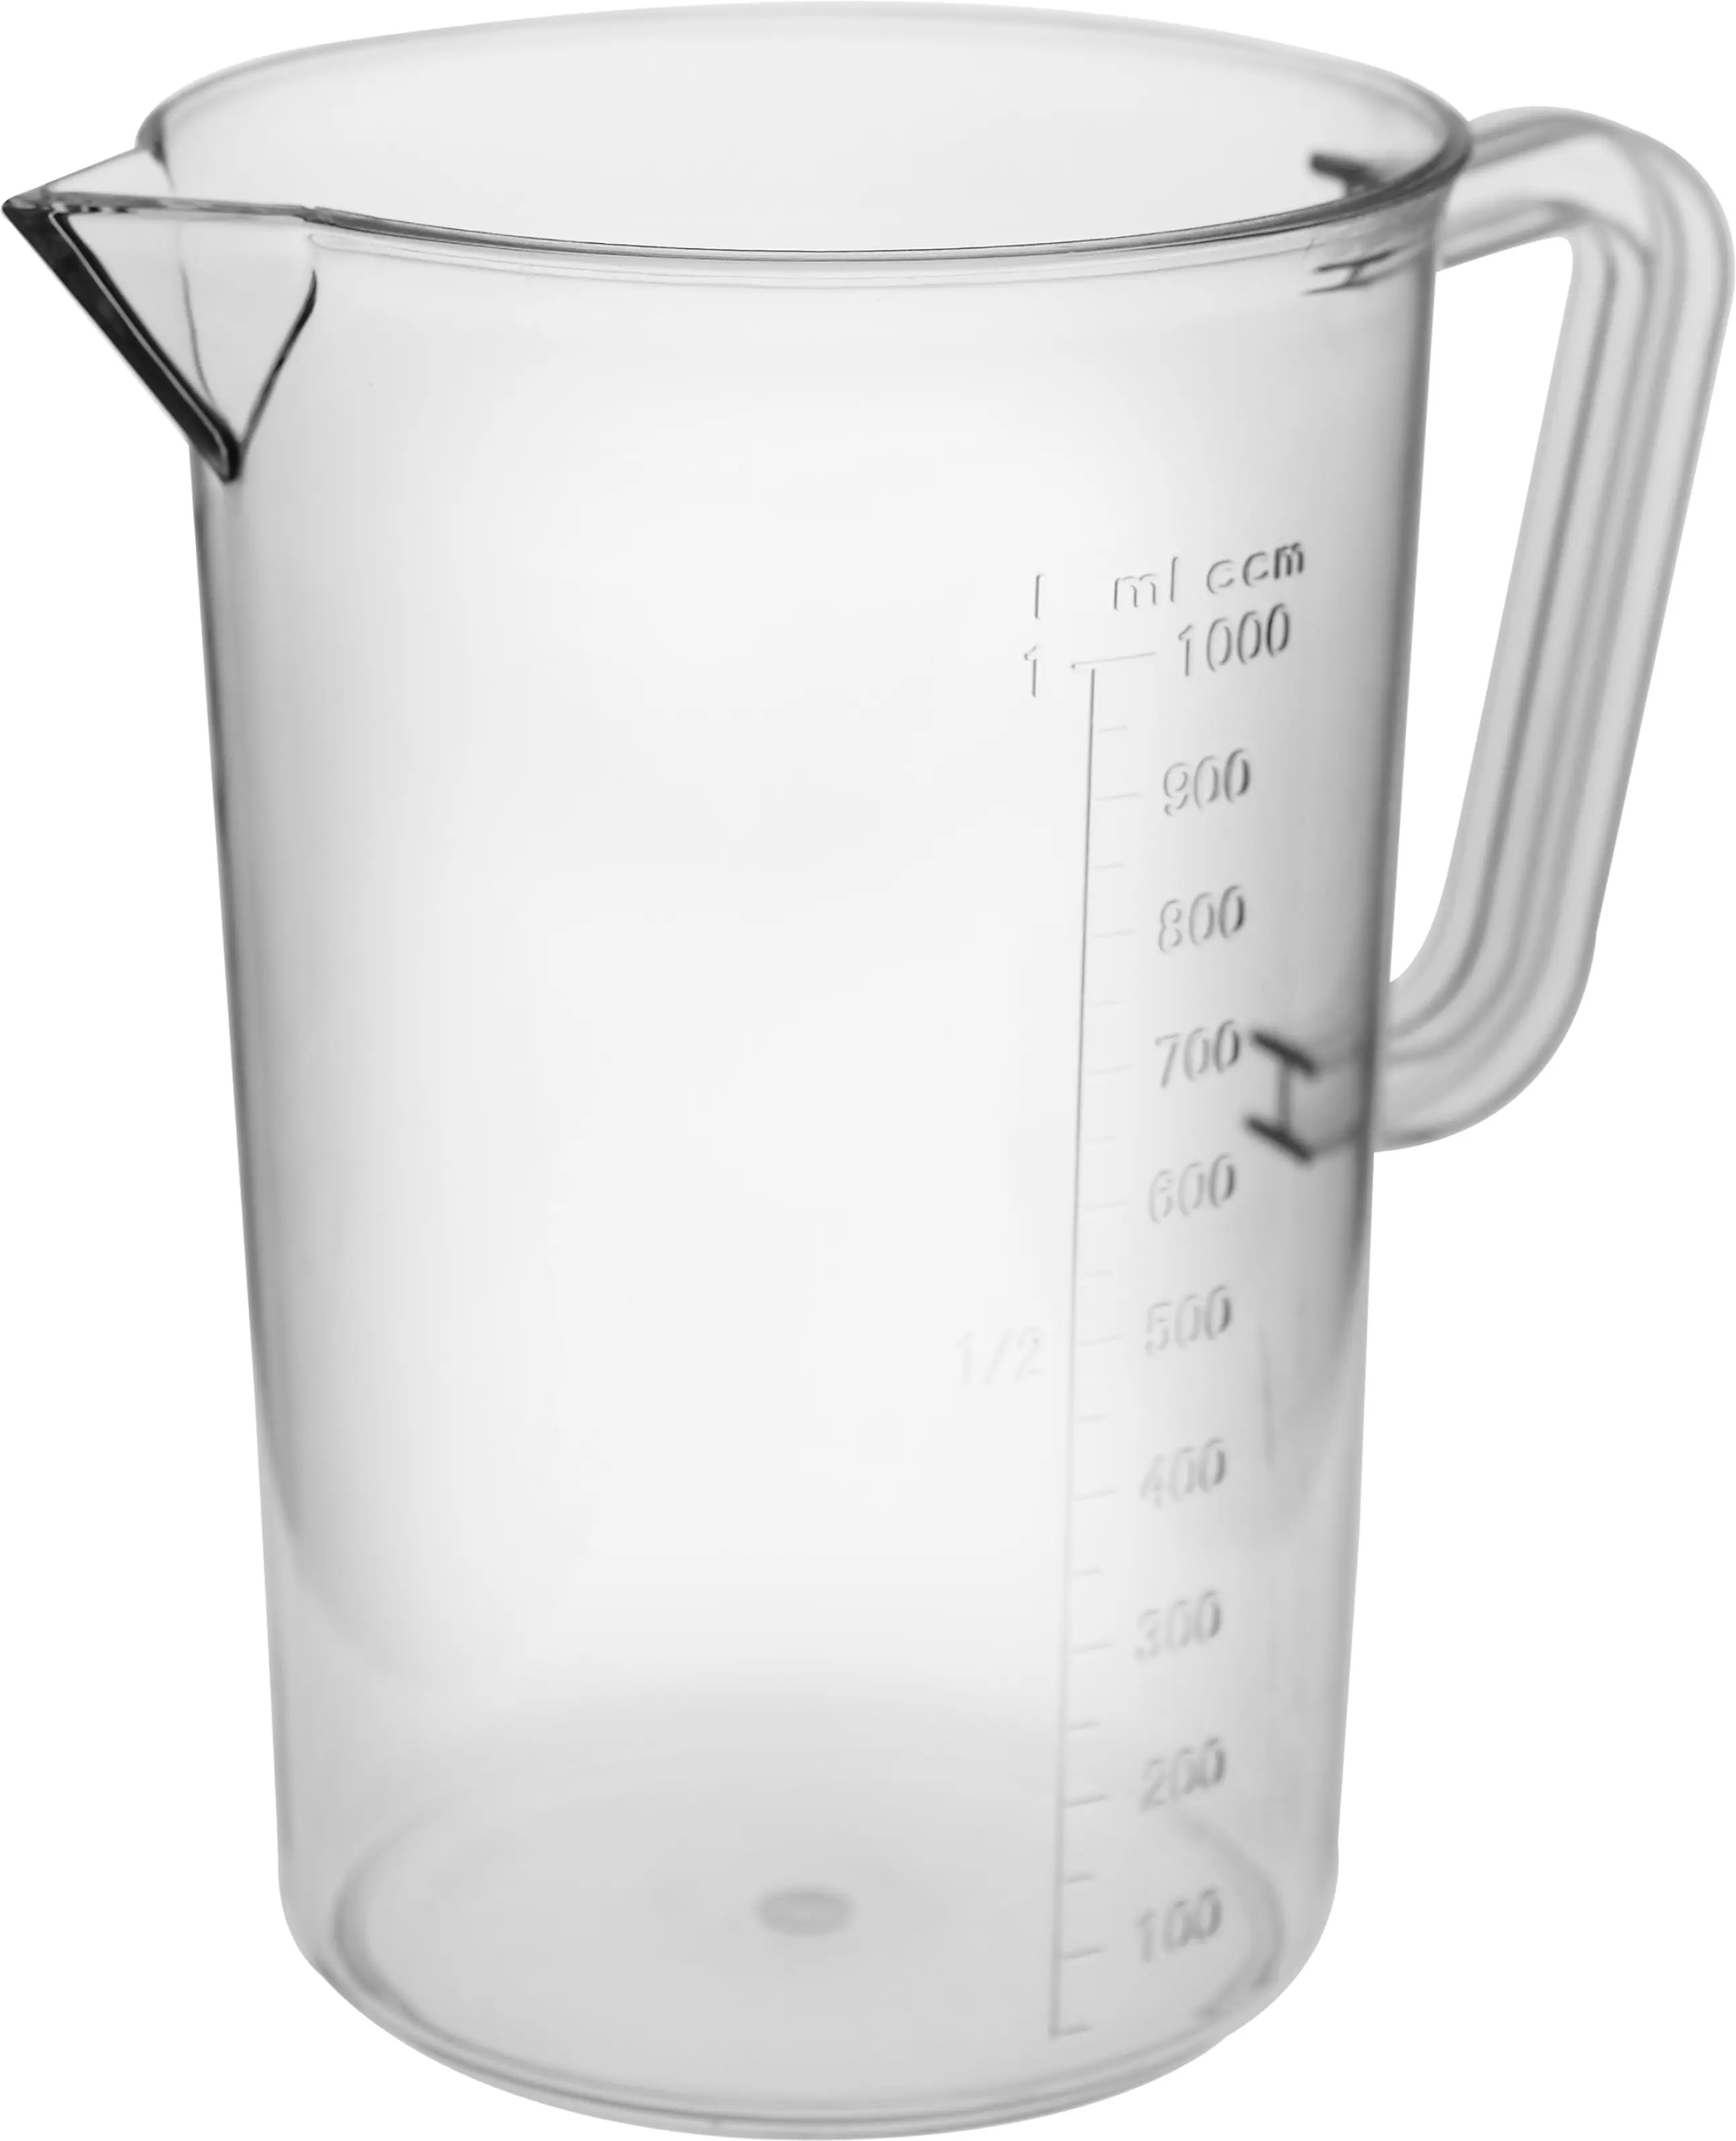 Plastic PP Cup Kitchenware Measuring Cup Recyclable Scaled